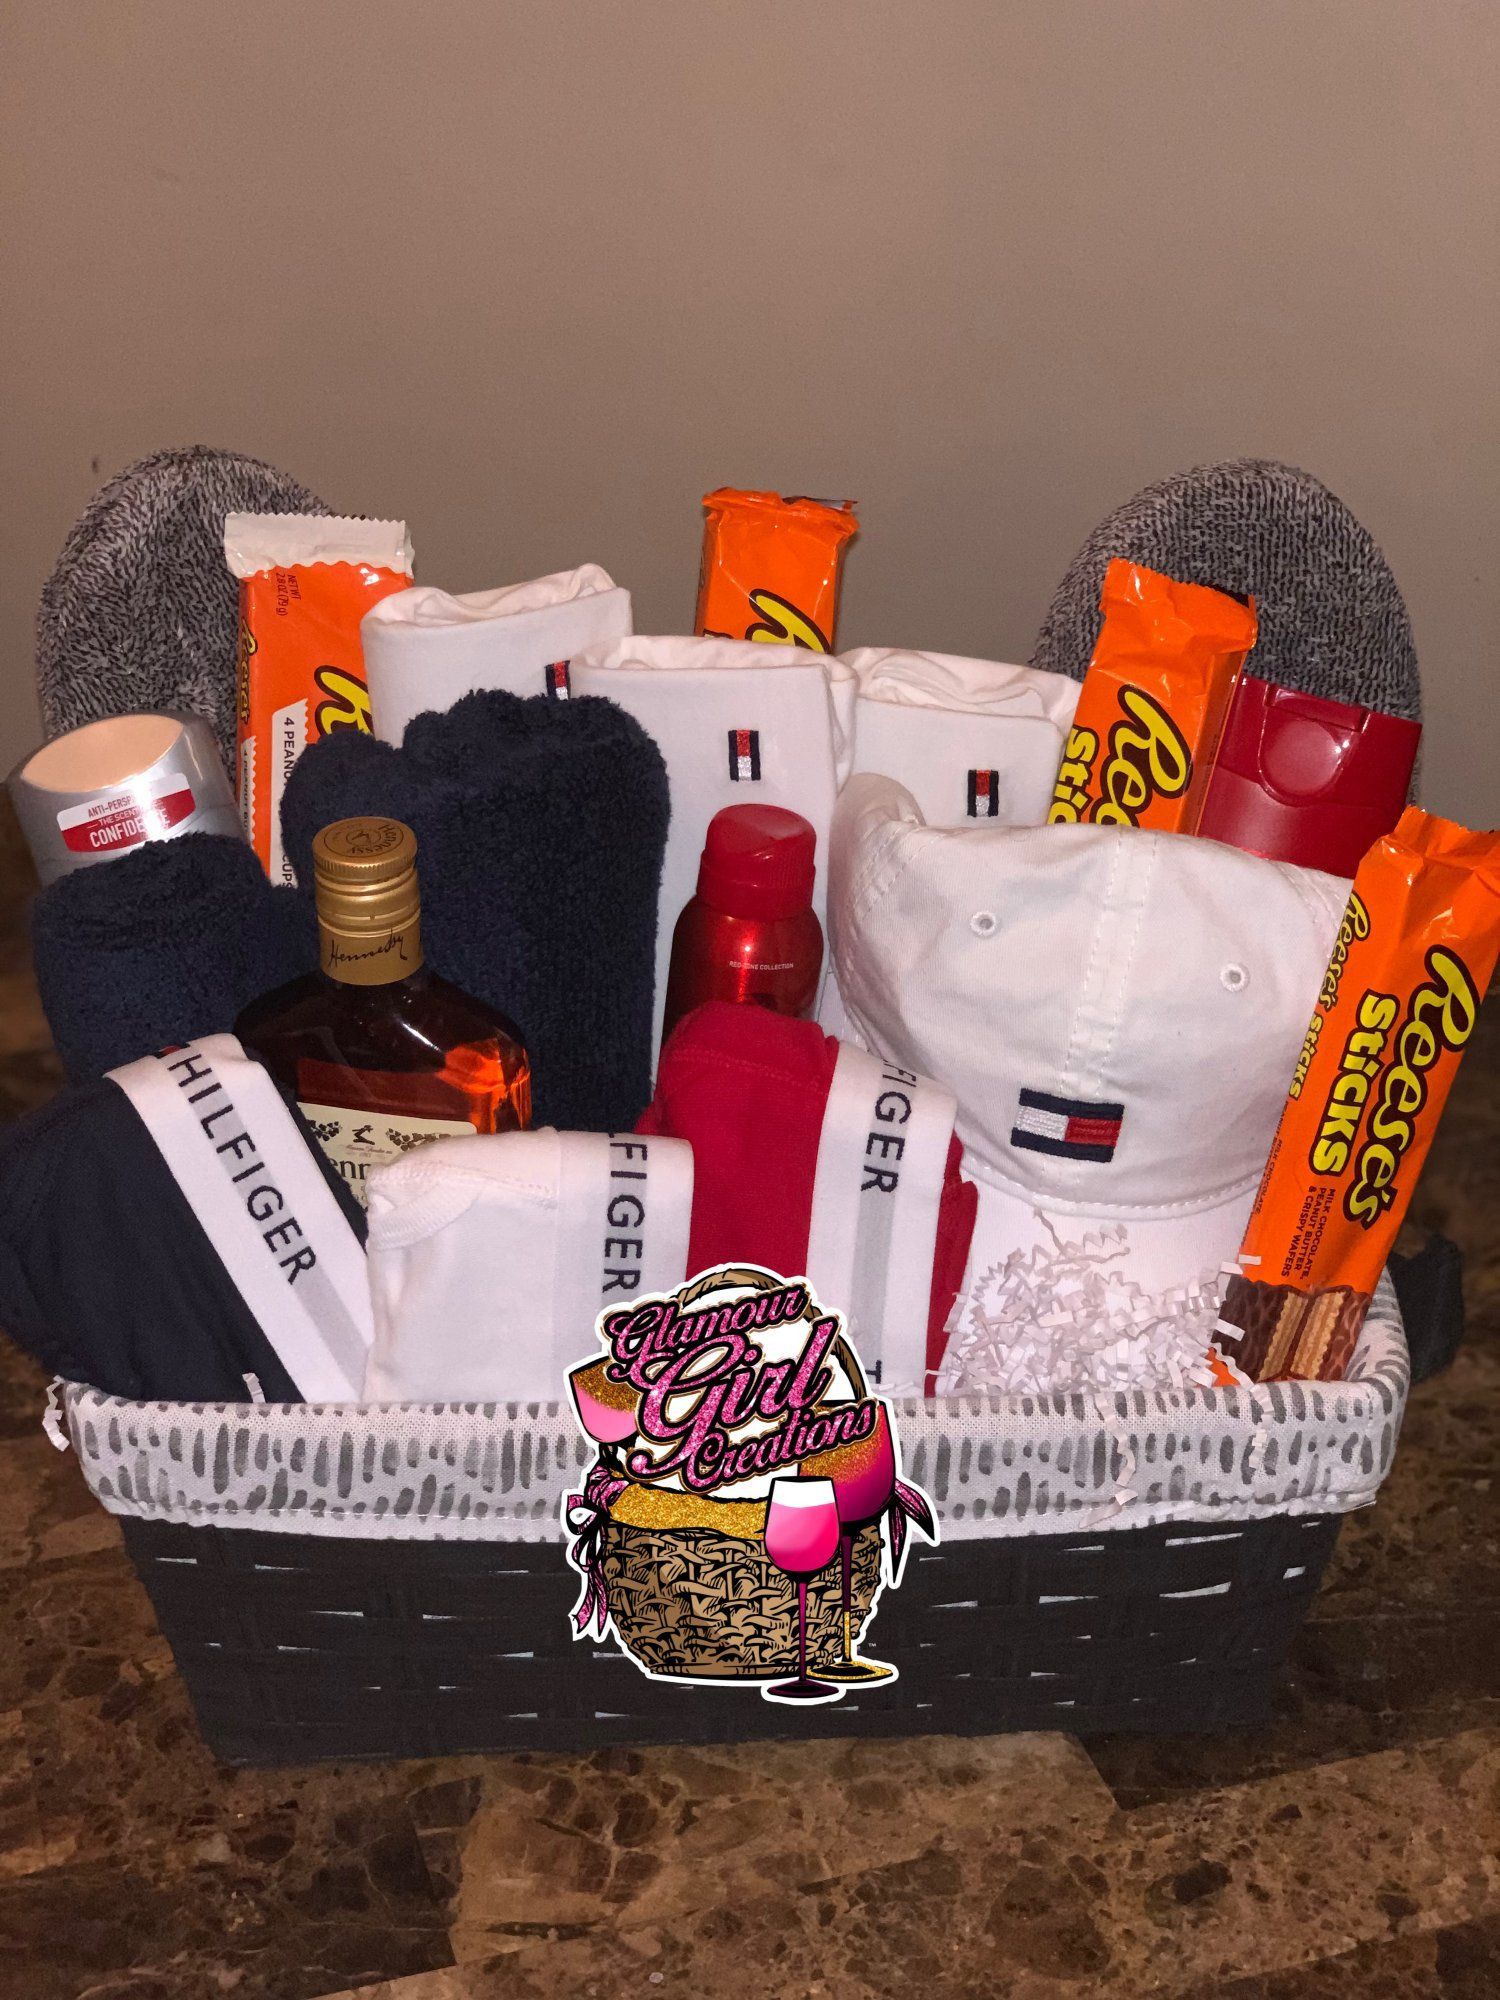 Best ideas about DIY Gift Ideas For Him
. Save or Pin Tommy Hilfiger basket Tommy hilfiger Now.